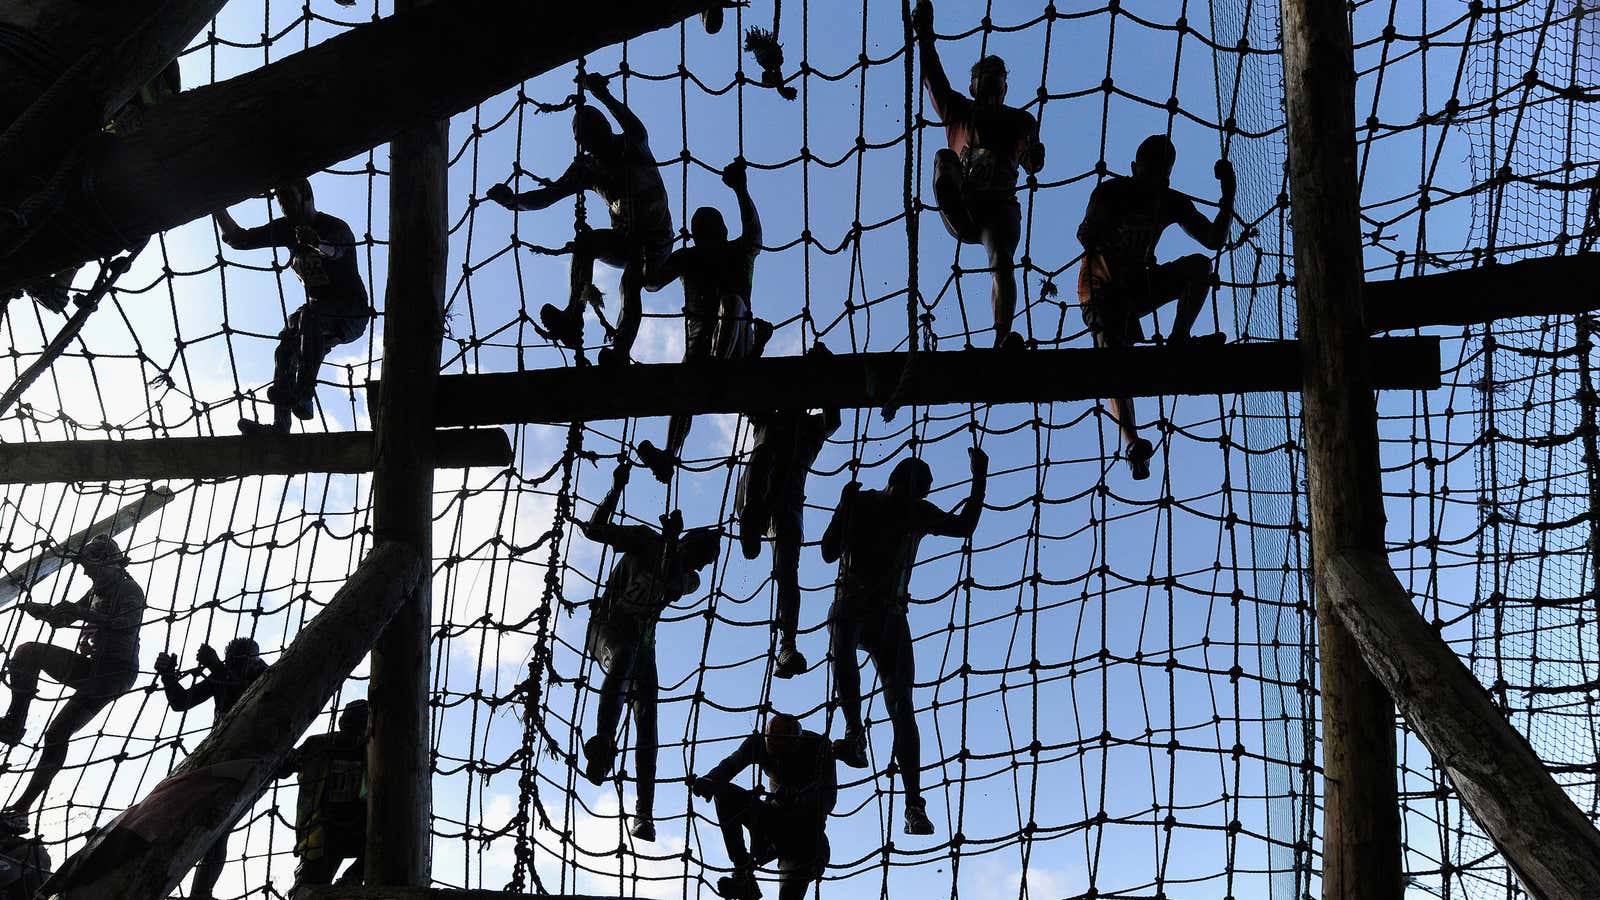 Competitors climb nets during the Tough Guy event in Perton, central England, January 27, 2013. The annual event to raise cash for charity challenges thousands…